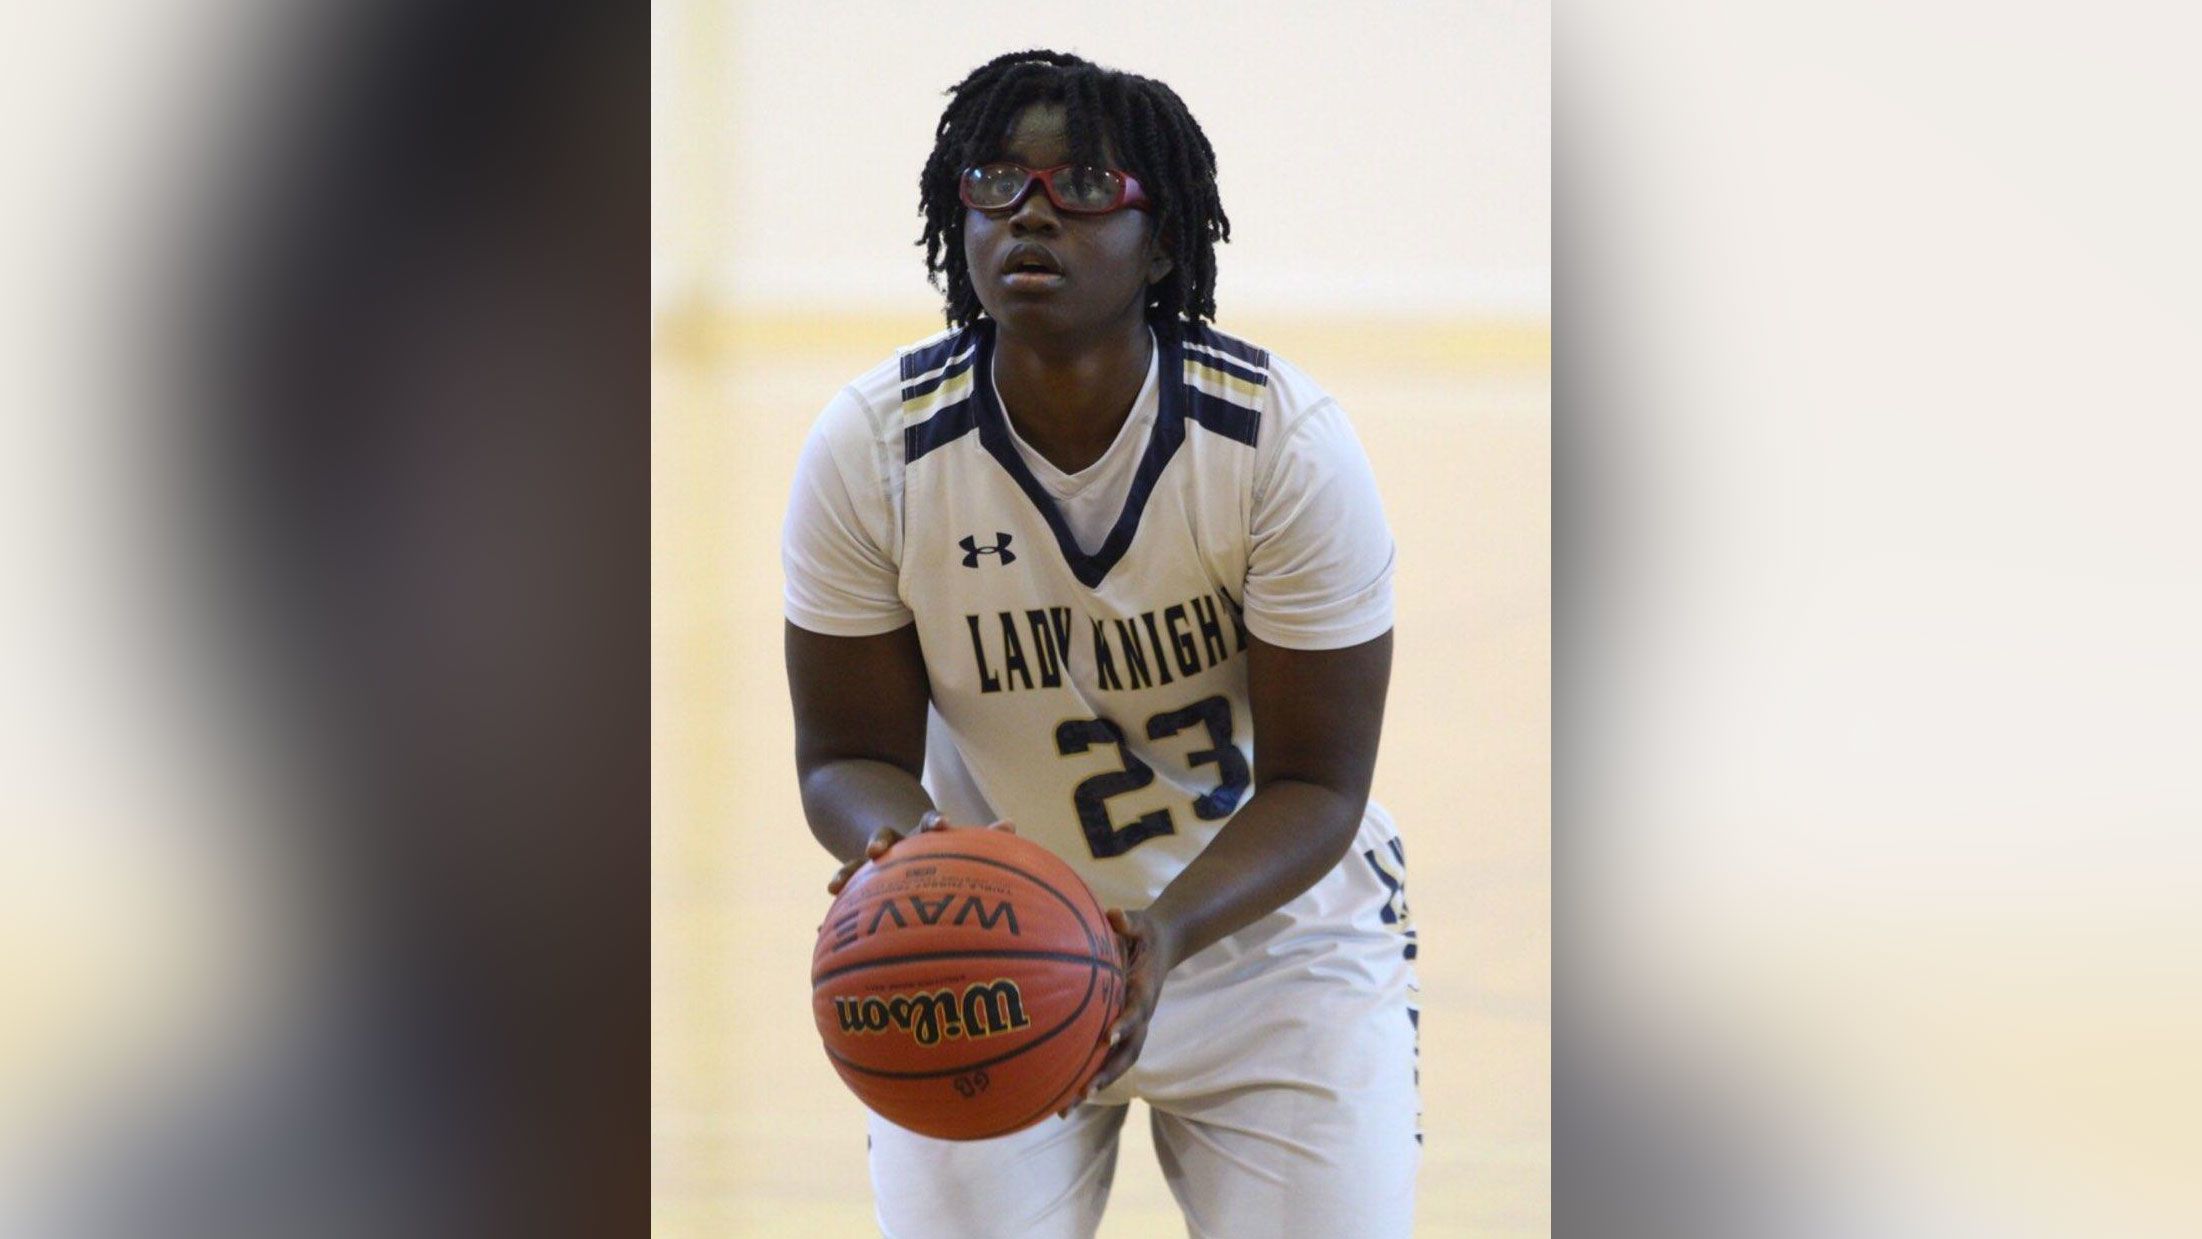 La Center teen who collapsed at basketball practice dies